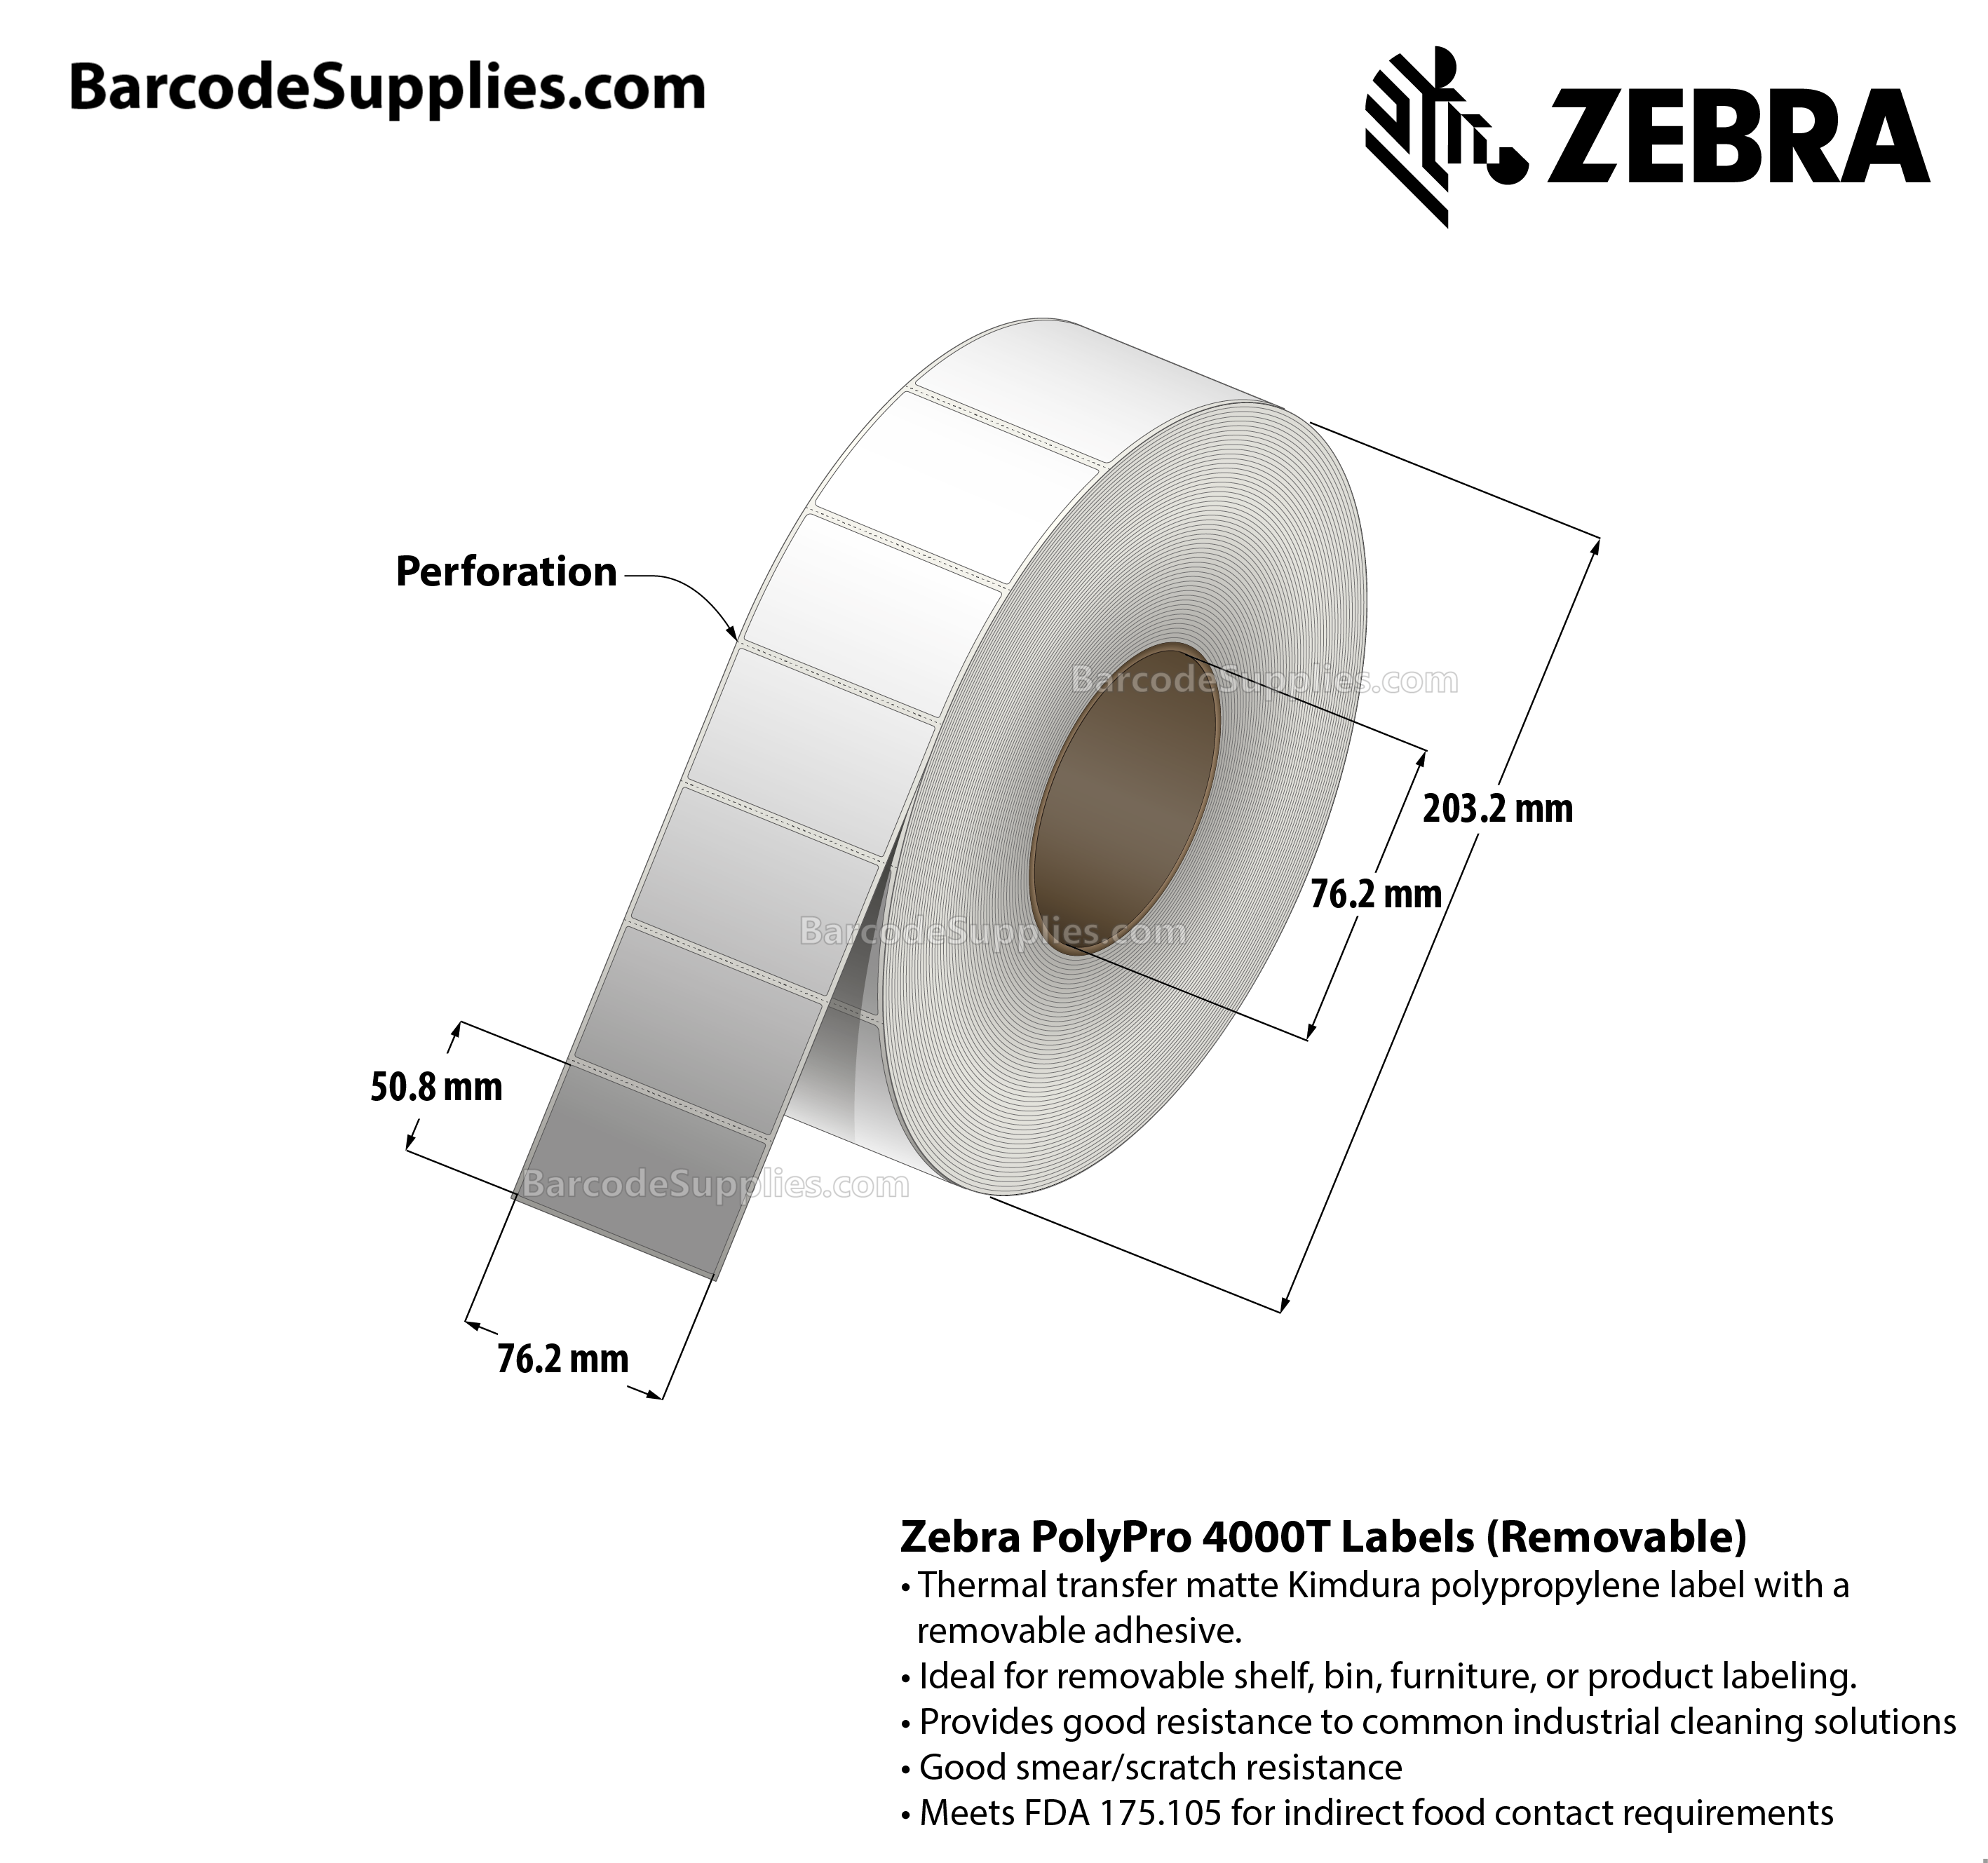 3 x 2 Thermal Transfer White PolyPro 4000T Removable Labels With Removable Adhesive - Perforated - 1000 Labels Per Roll - Carton Of 1 Rolls - 1000 Labels Total - MPN: 10022937